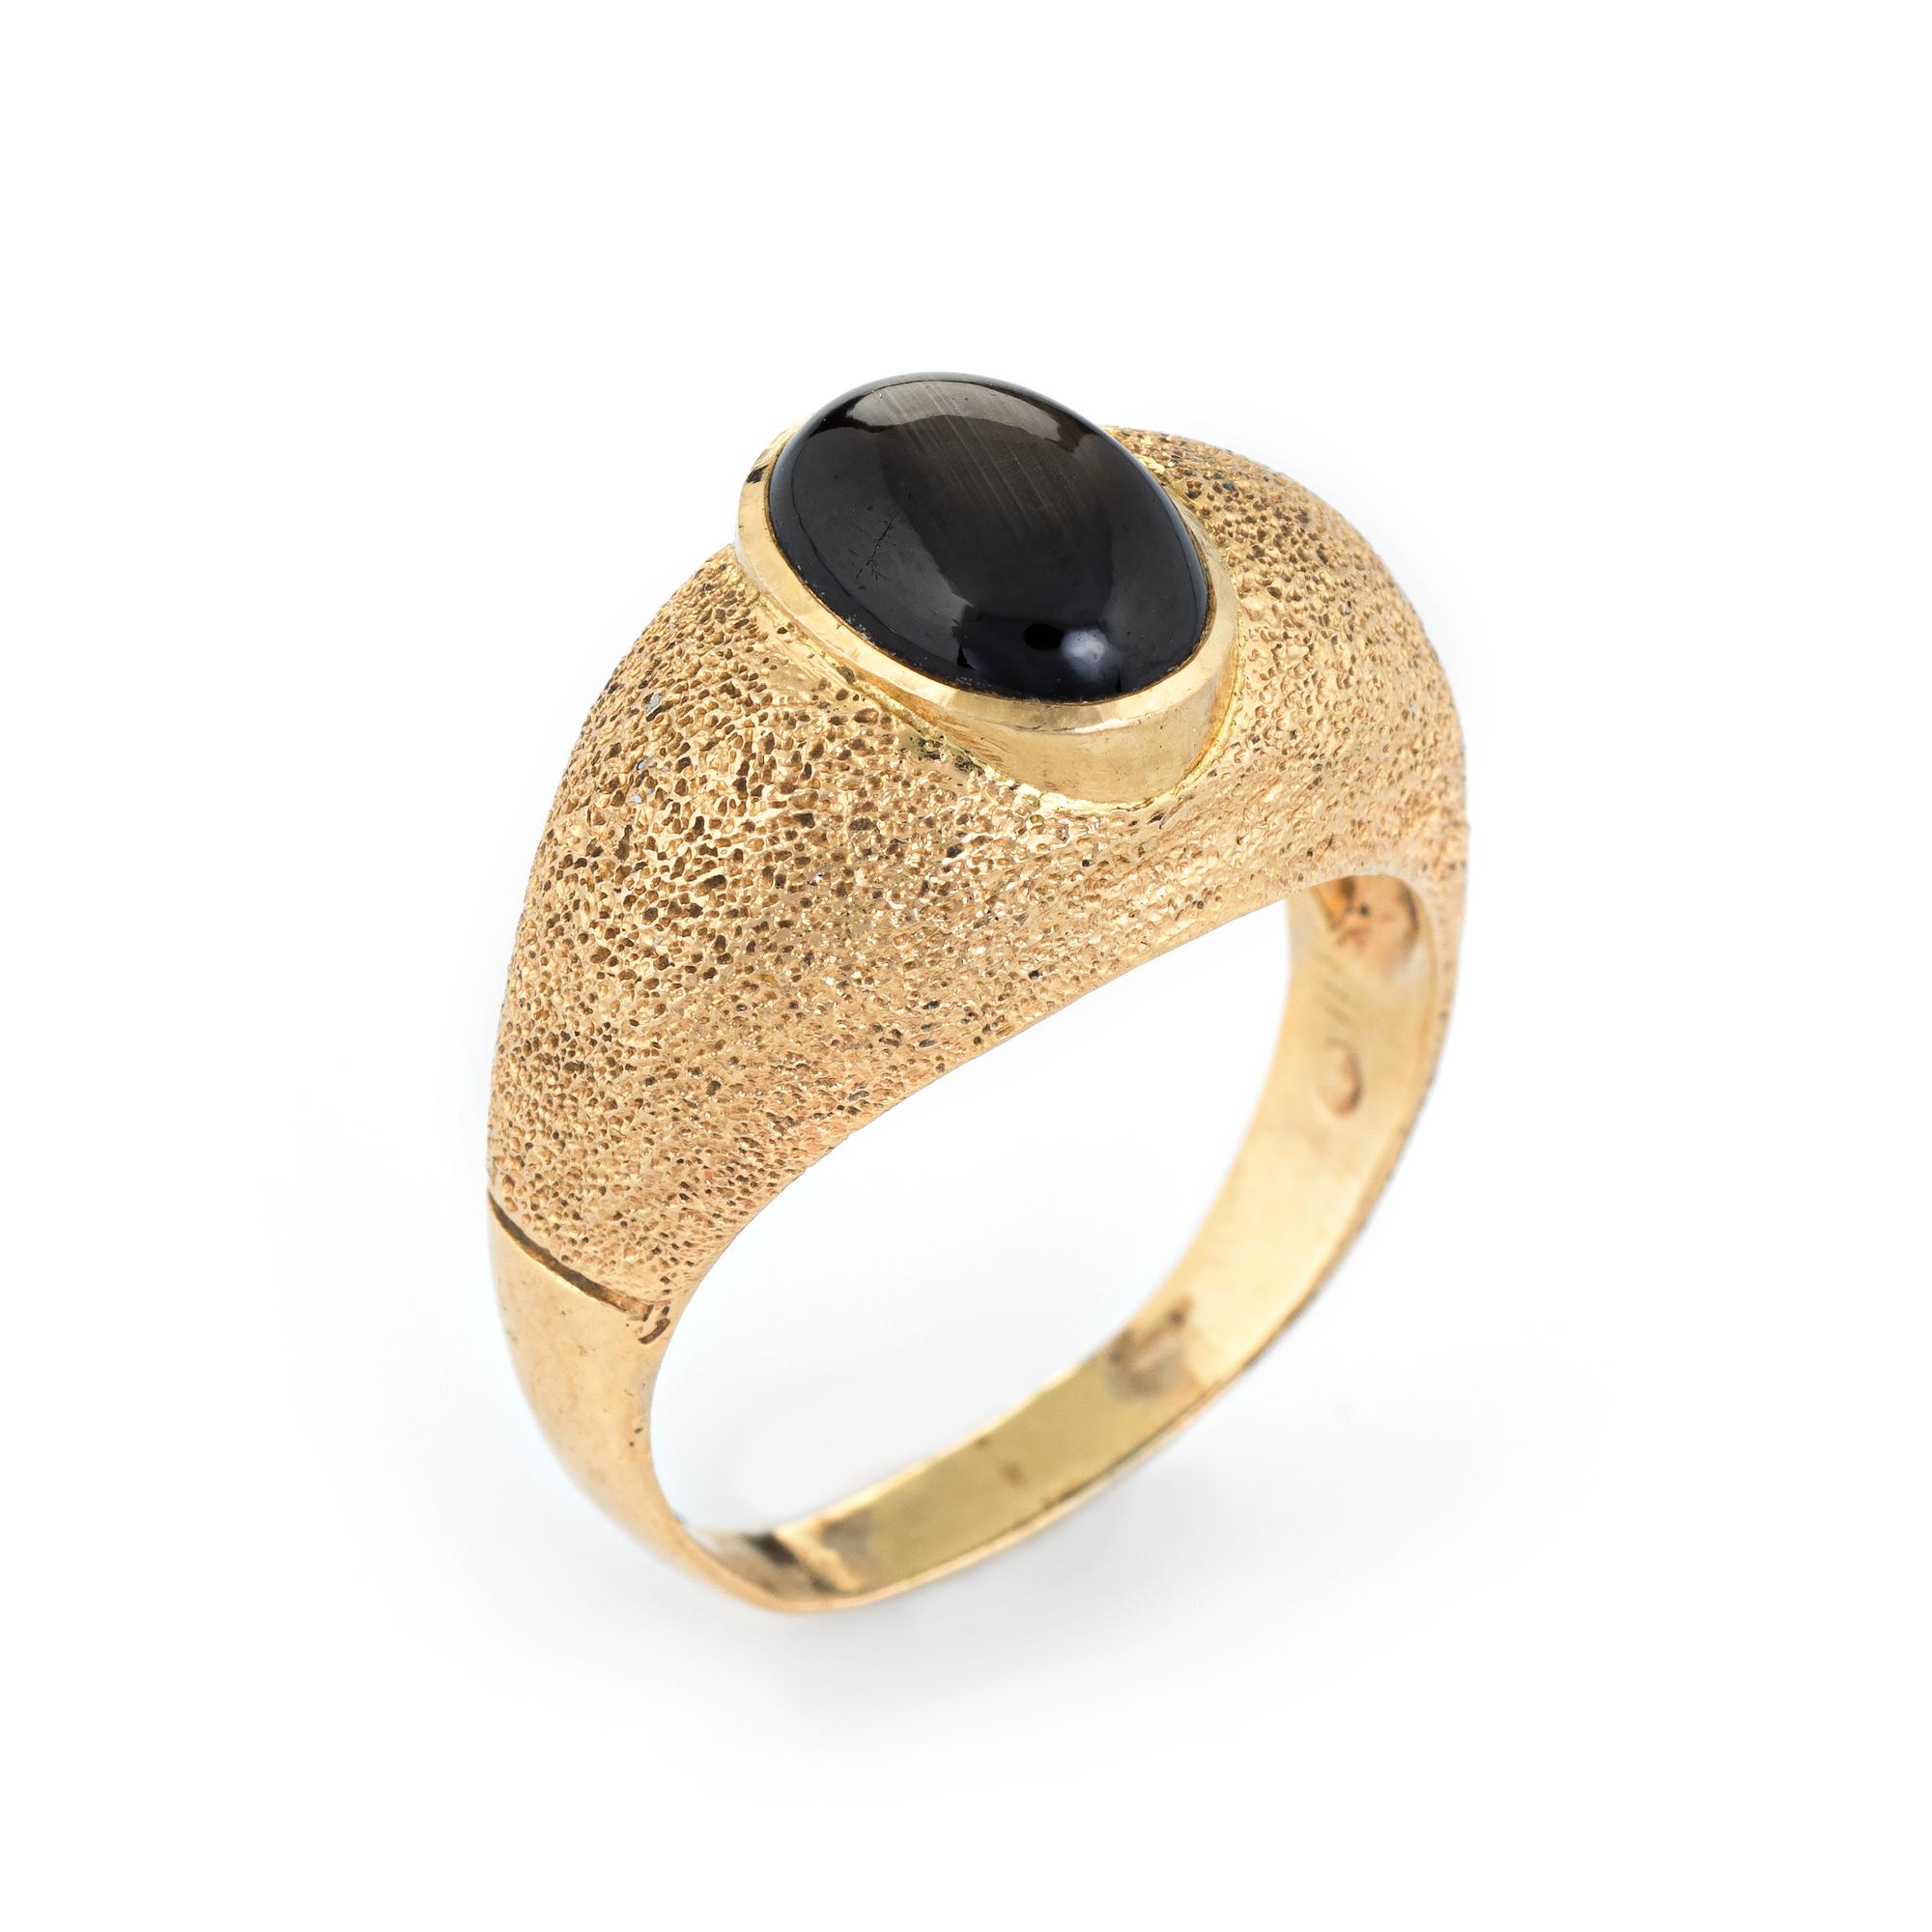 Elegant vintage natural black star sapphire ring (circa 1960s to 1970s), crafted in 14 karat yellow gold. 

The black star sapphire measures 10mm x 7mm (estimated at 2.50 carats). The sapphire is in excellent condition and free of cracks or chips.